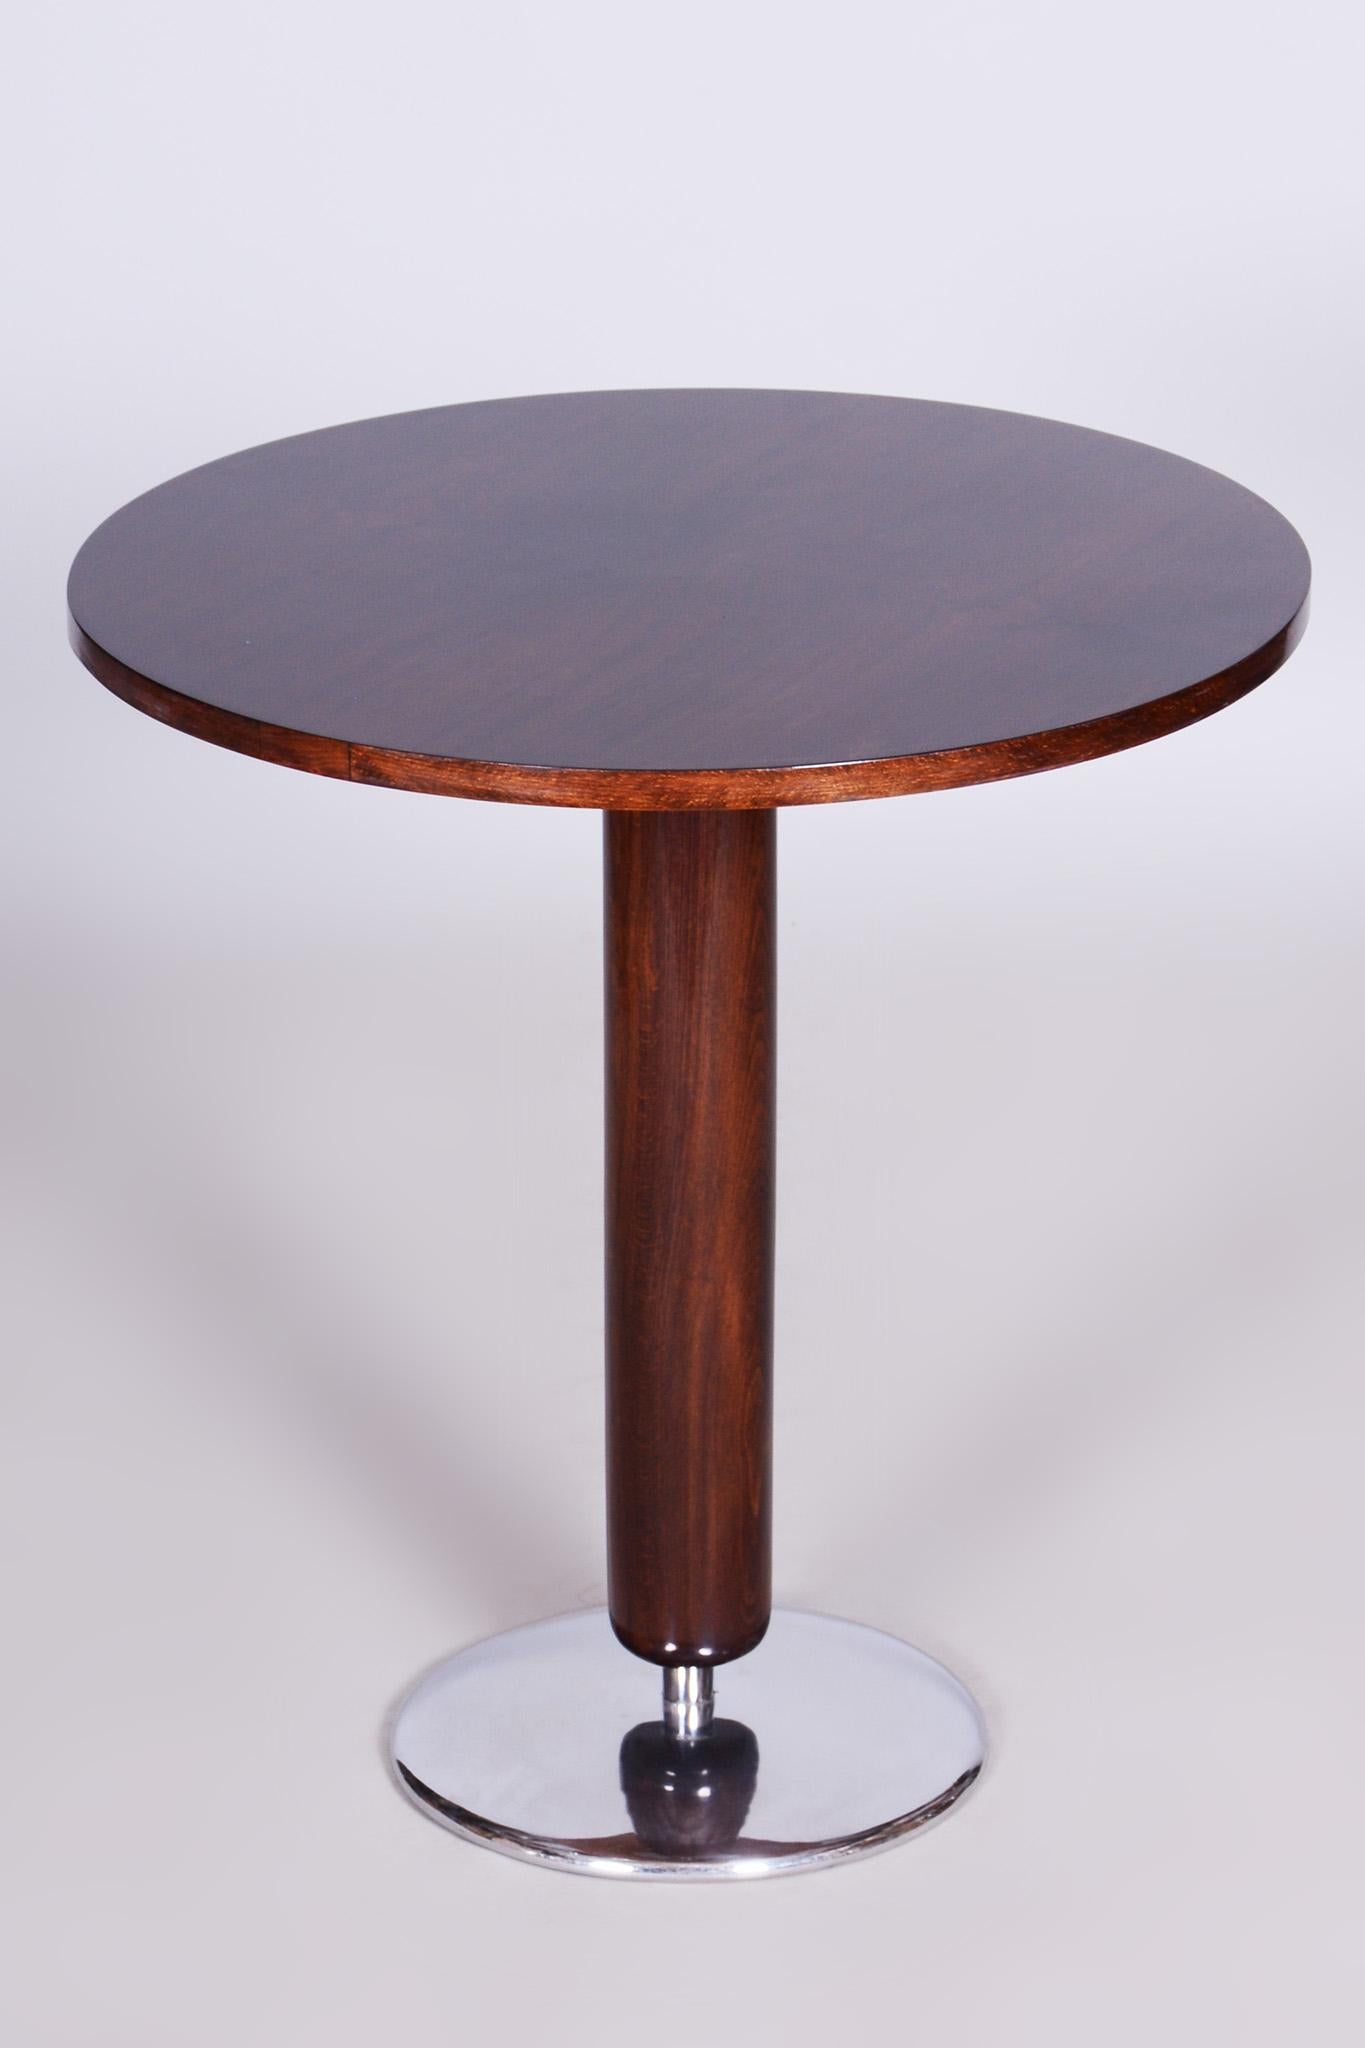 Small Art Deco Round Table.

Material: walnut and chrome
Completely restored.
Source: Czechia
Period: 1930-1939
Designer: Jindrich Halabala
Maker: UP Závody 

Revived polish.
Professionally cleaned chrome.
 